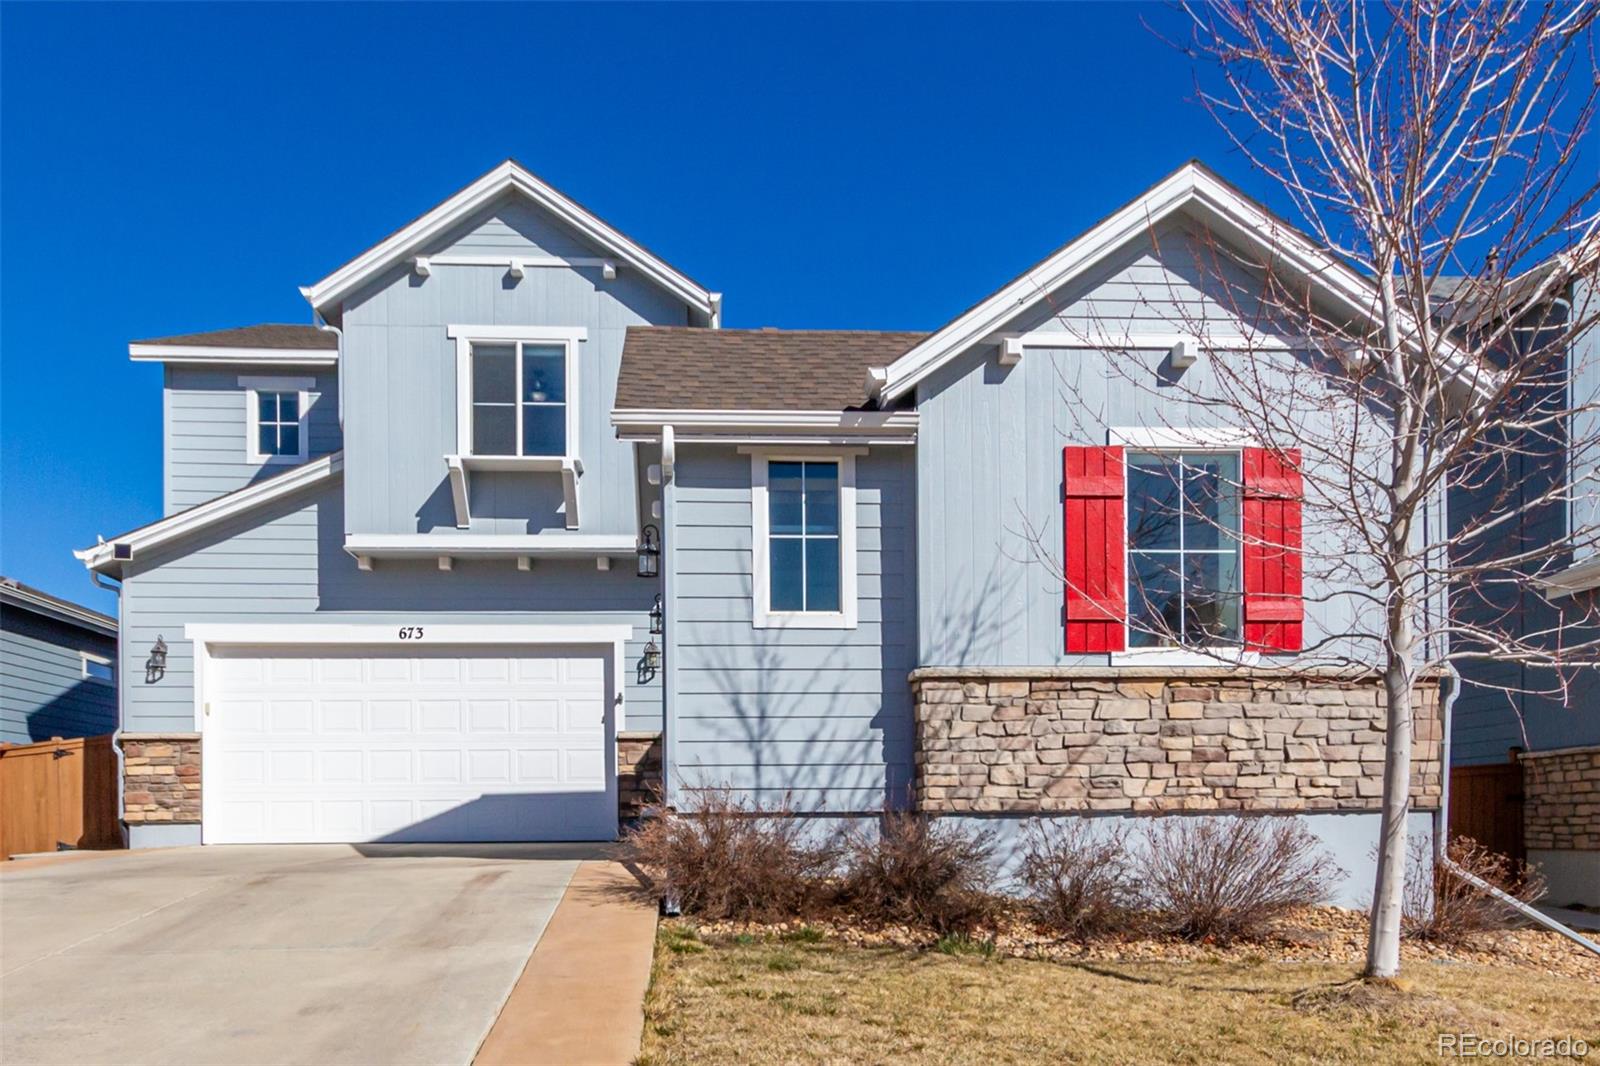 673 W 172nd Place, broomfield MLS: 9687633 Beds: 6 Baths: 6 Price: $750,000